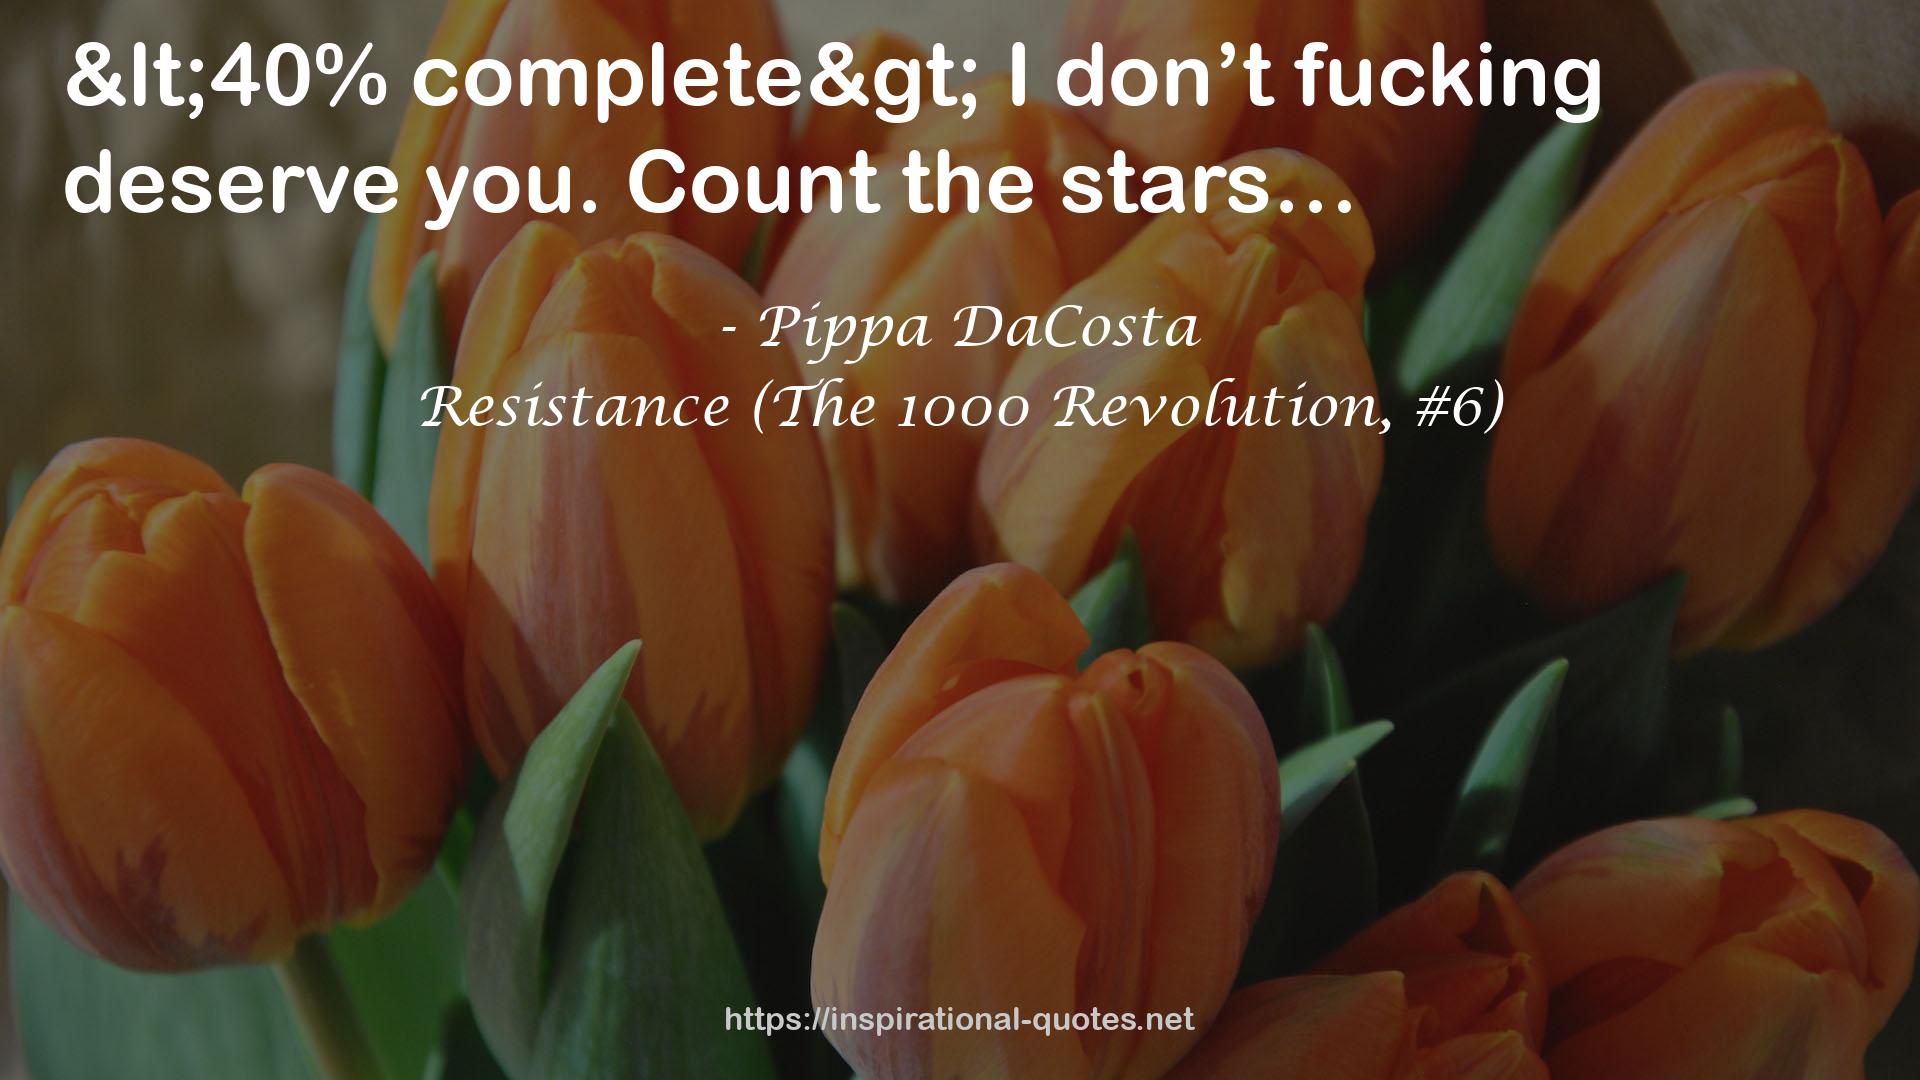 Resistance (The 1000 Revolution, #6) QUOTES